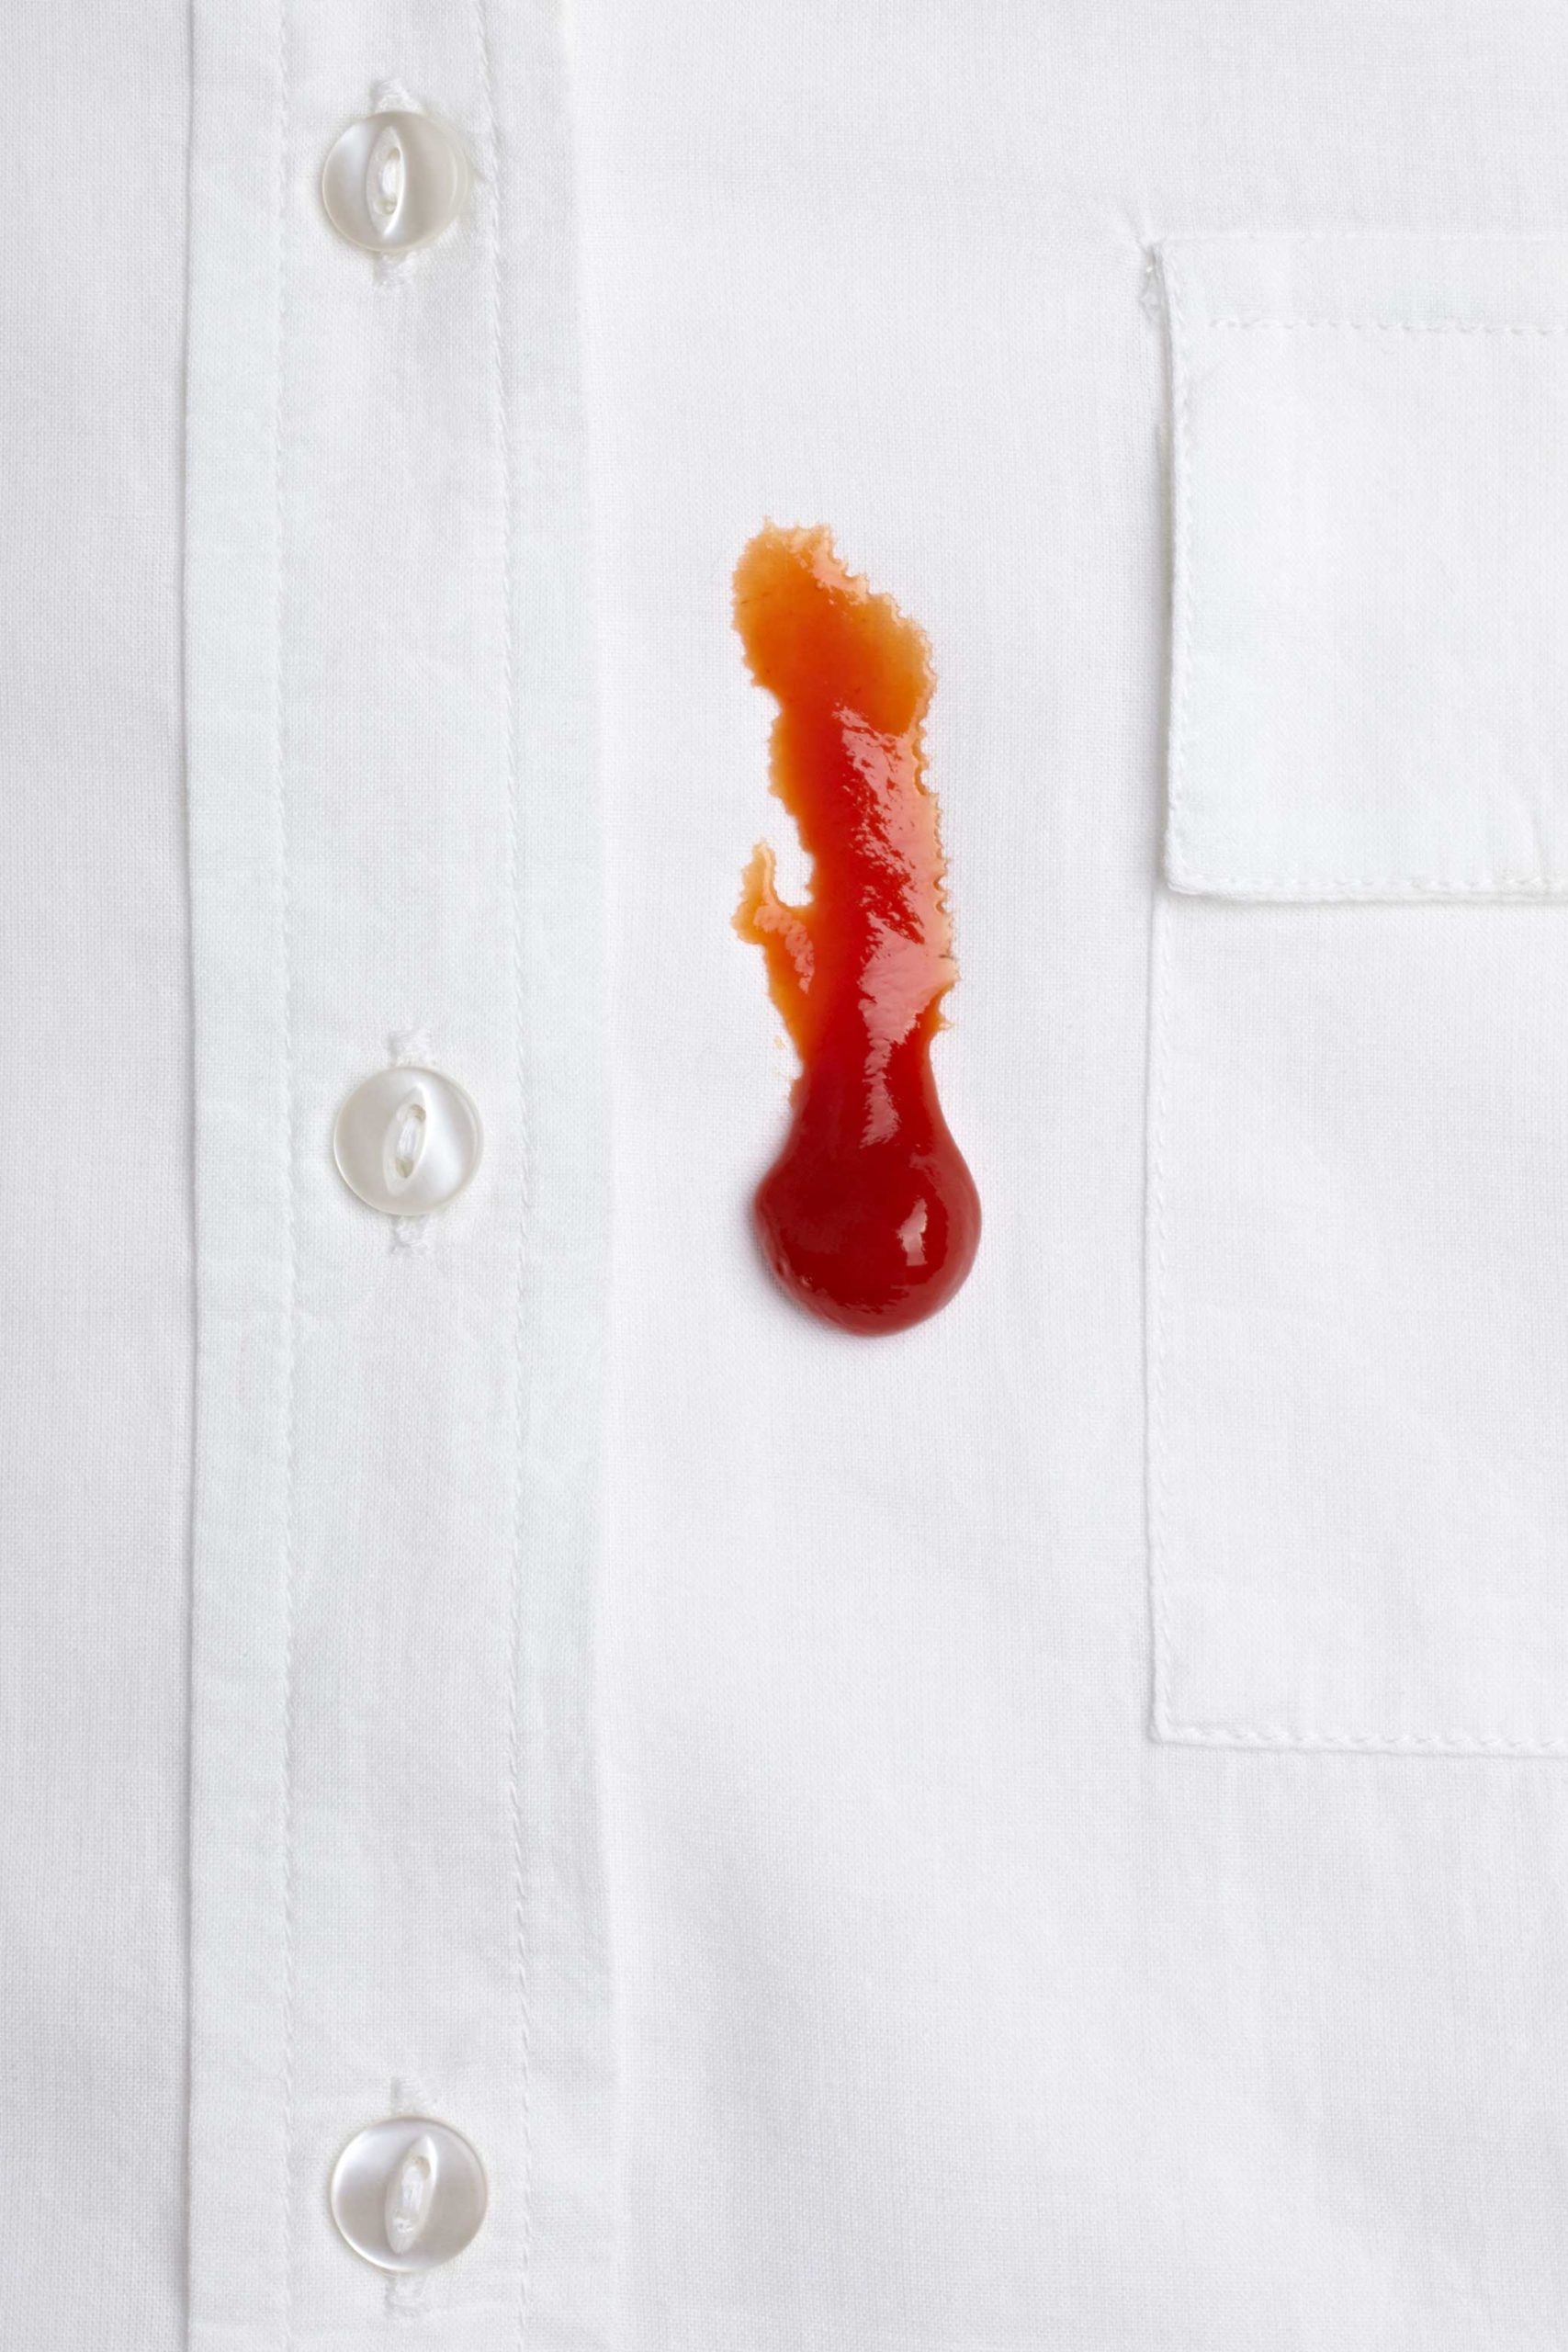 Mr-Jeff_Lifestyle_Services_ketchup-stain_01